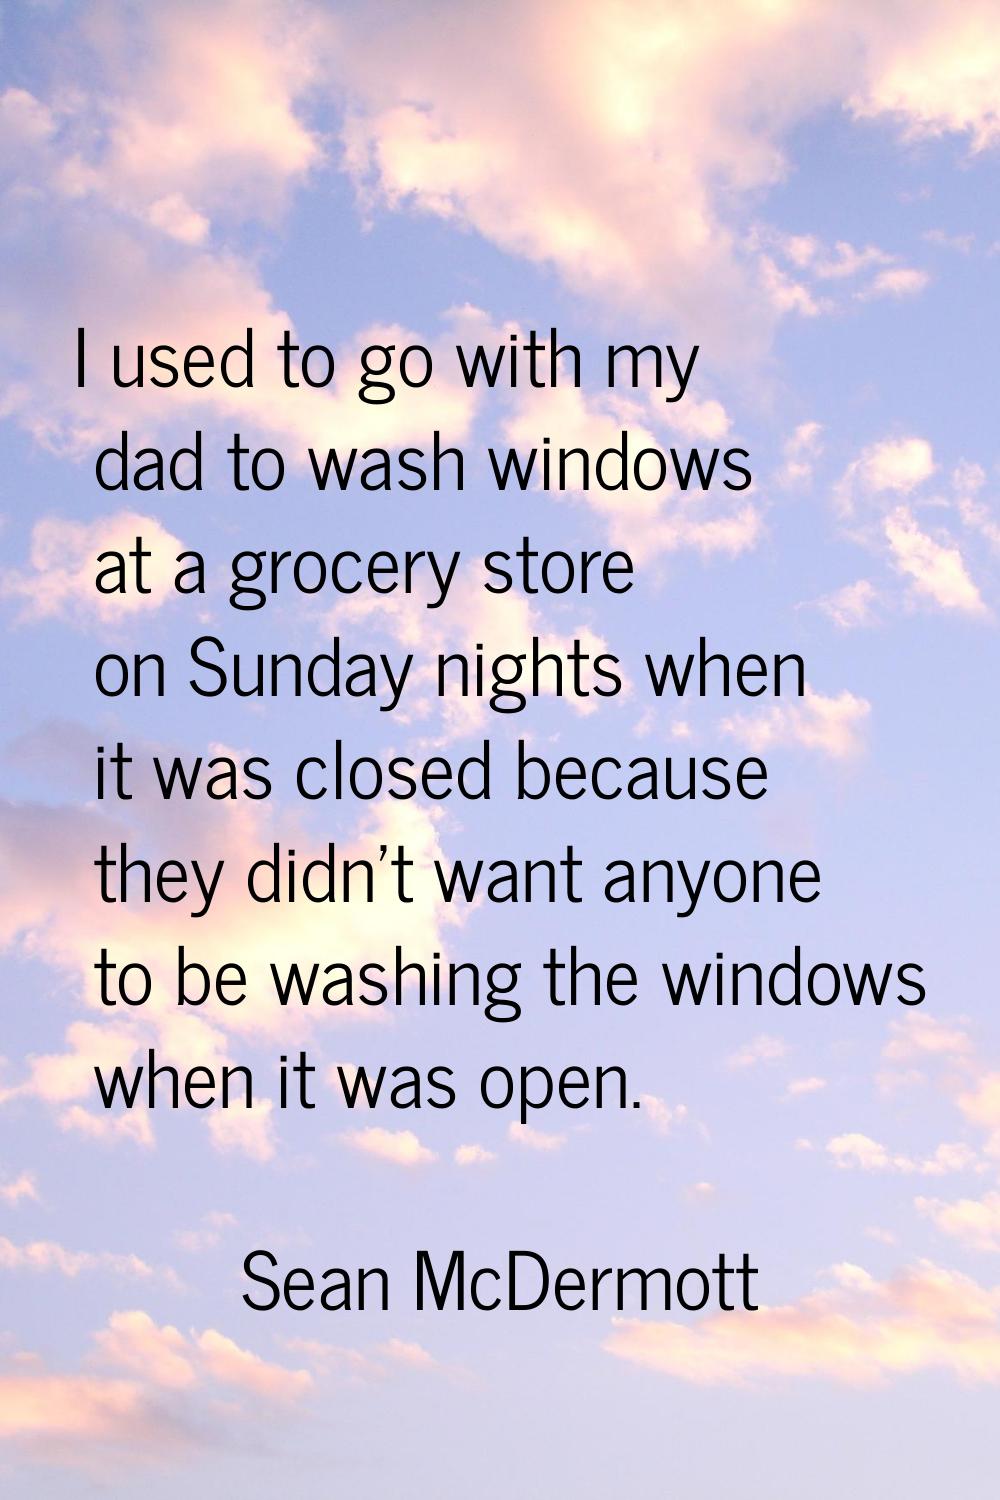 I used to go with my dad to wash windows at a grocery store on Sunday nights when it was closed bec